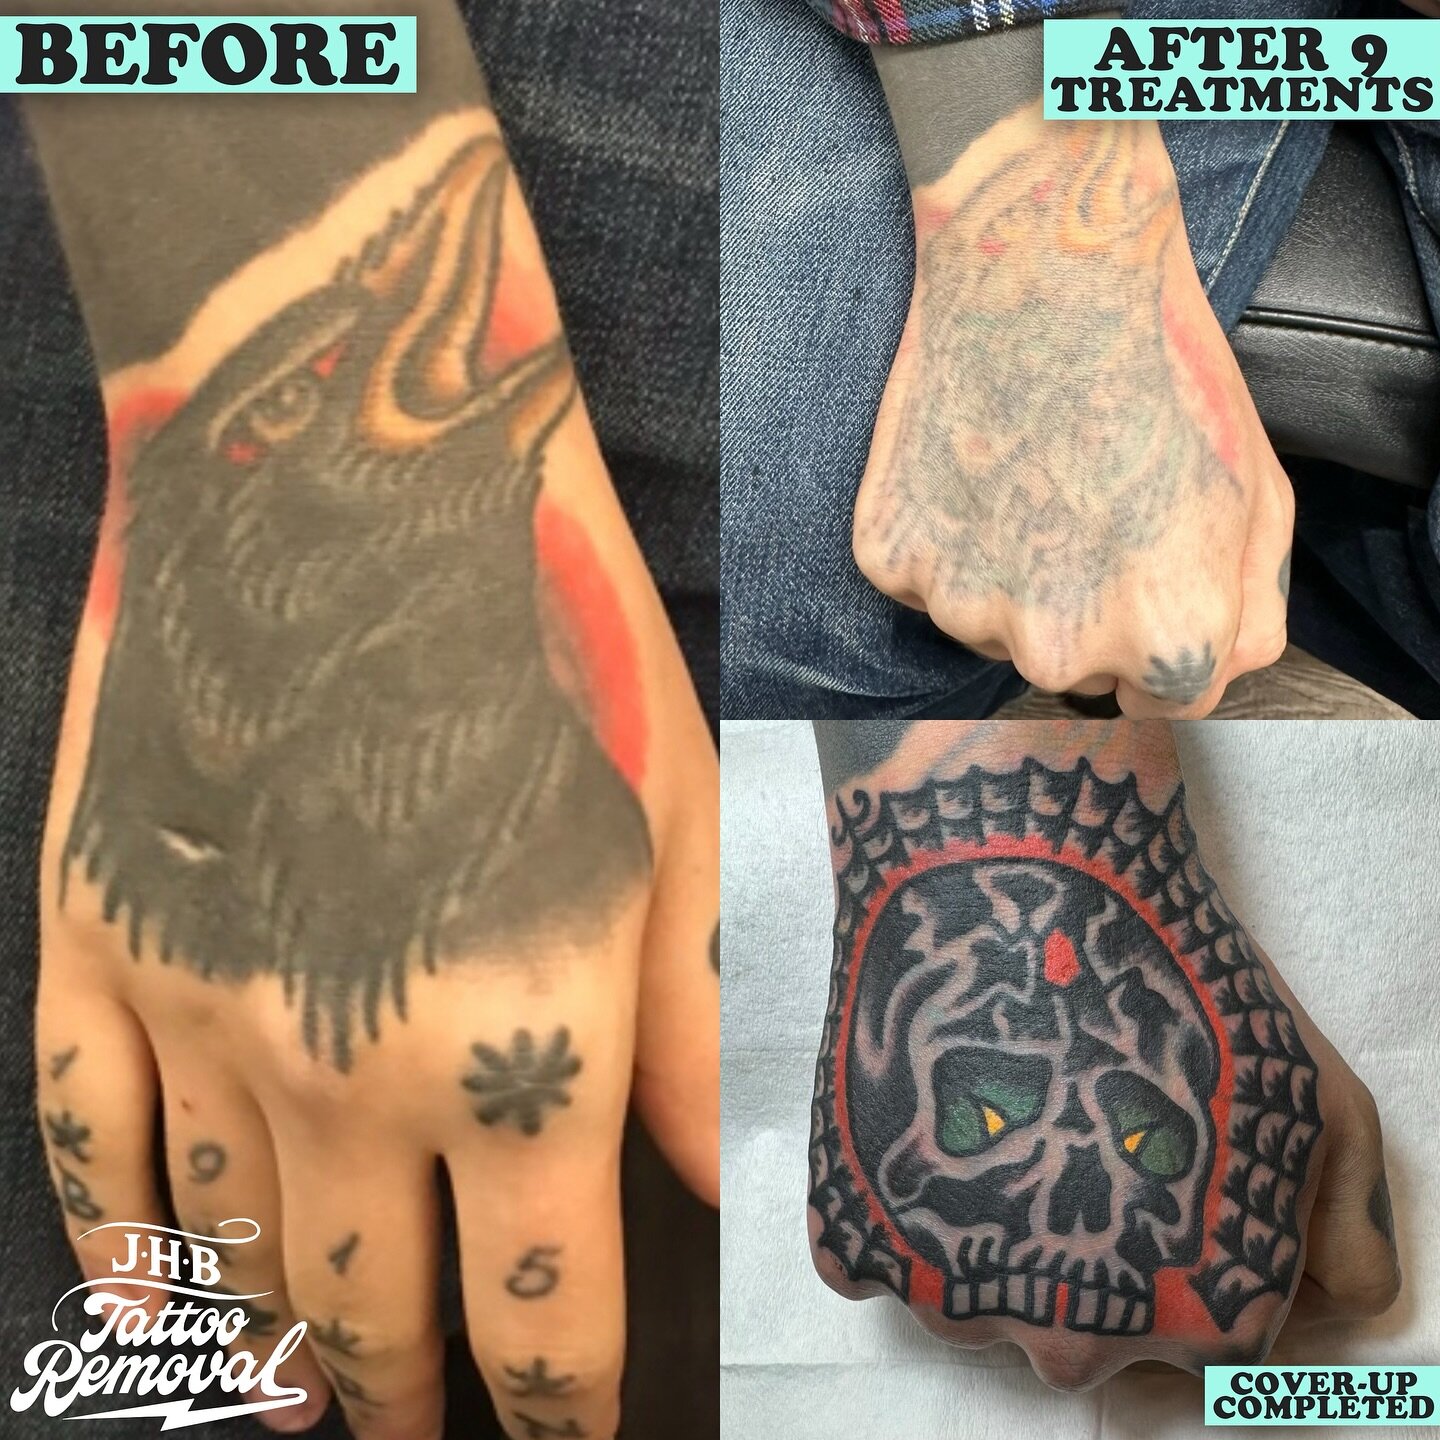 @nickylatt is one of the few people on this plant 🌍 to have had 4(I think) full hand tattoos! We removed this coverup tattoo down ready for another coverup by @bertkrak at @smithstreetrodandgunclub 
Nicky finally has a hand tattoo he loves and I&rsq